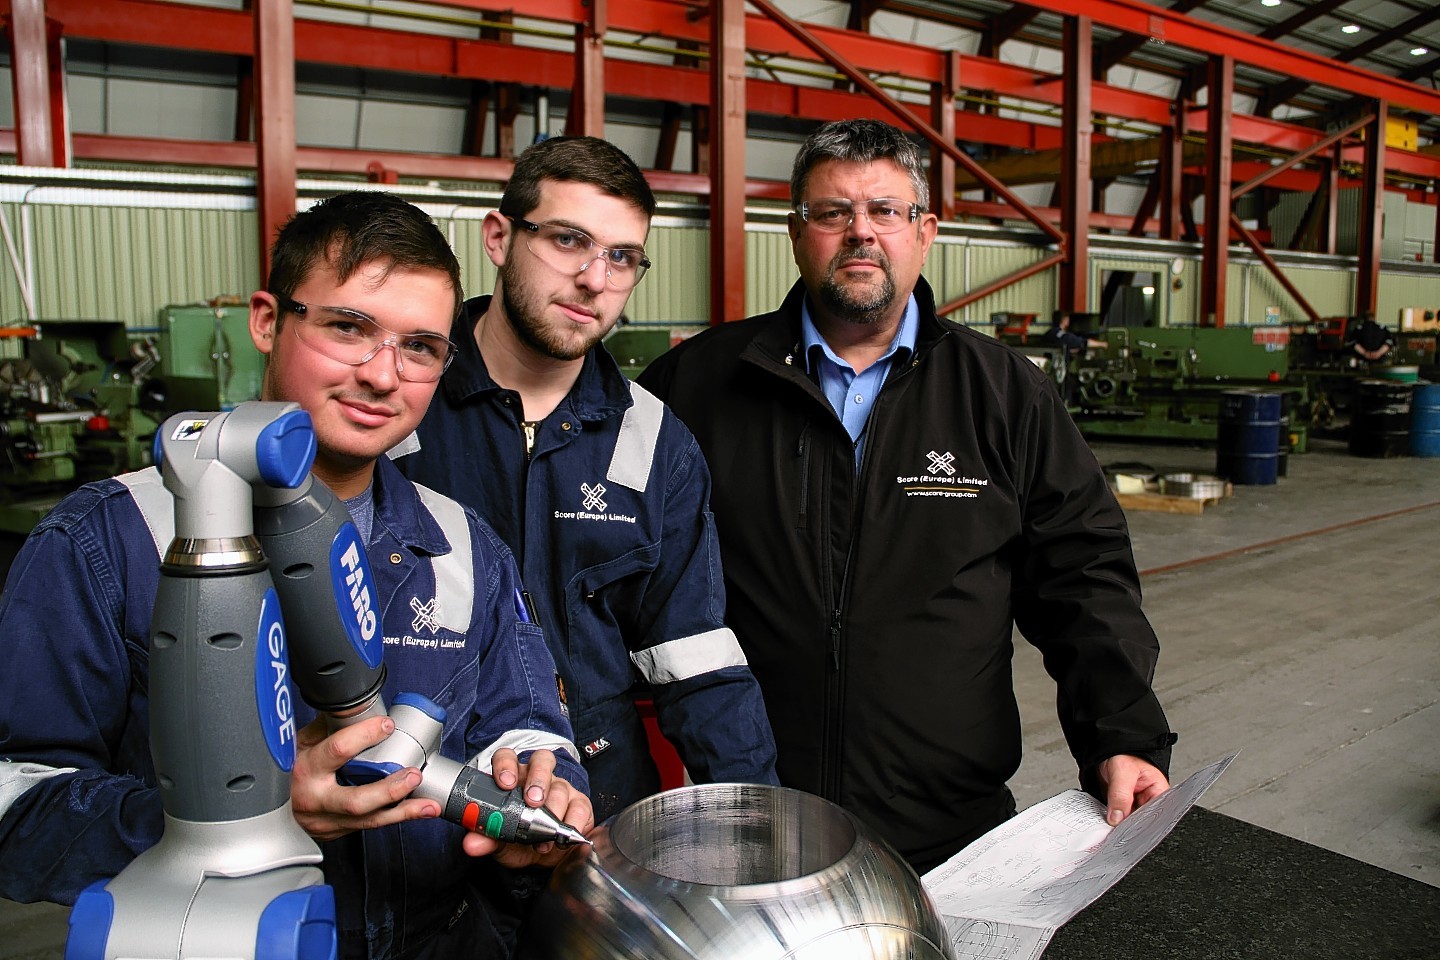 Score Group’s Conrad Ritchie with apprentices Ross Smith and George Heatherwick